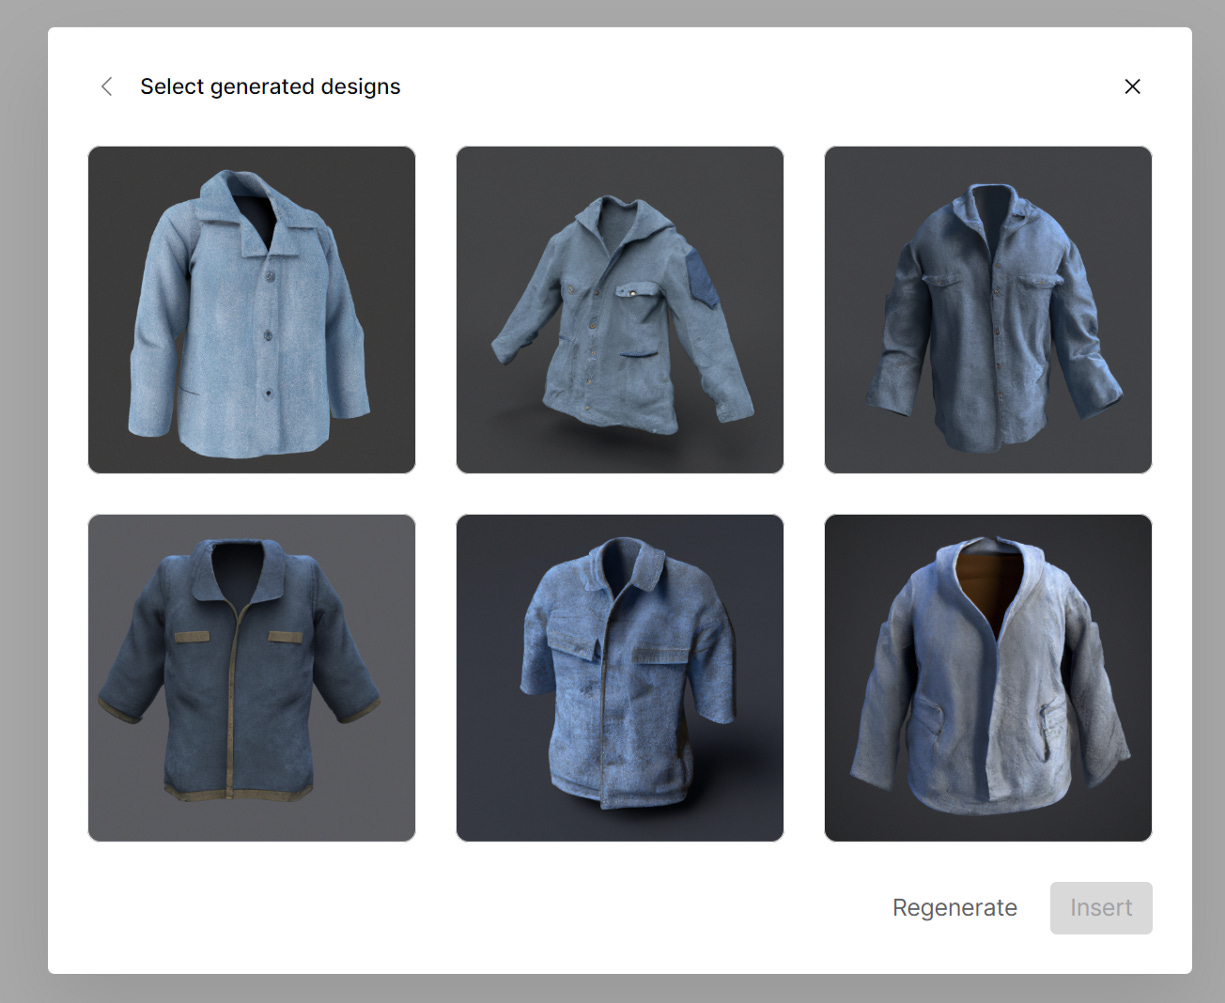 Collage of six jackets generated by Dall-E2 AI